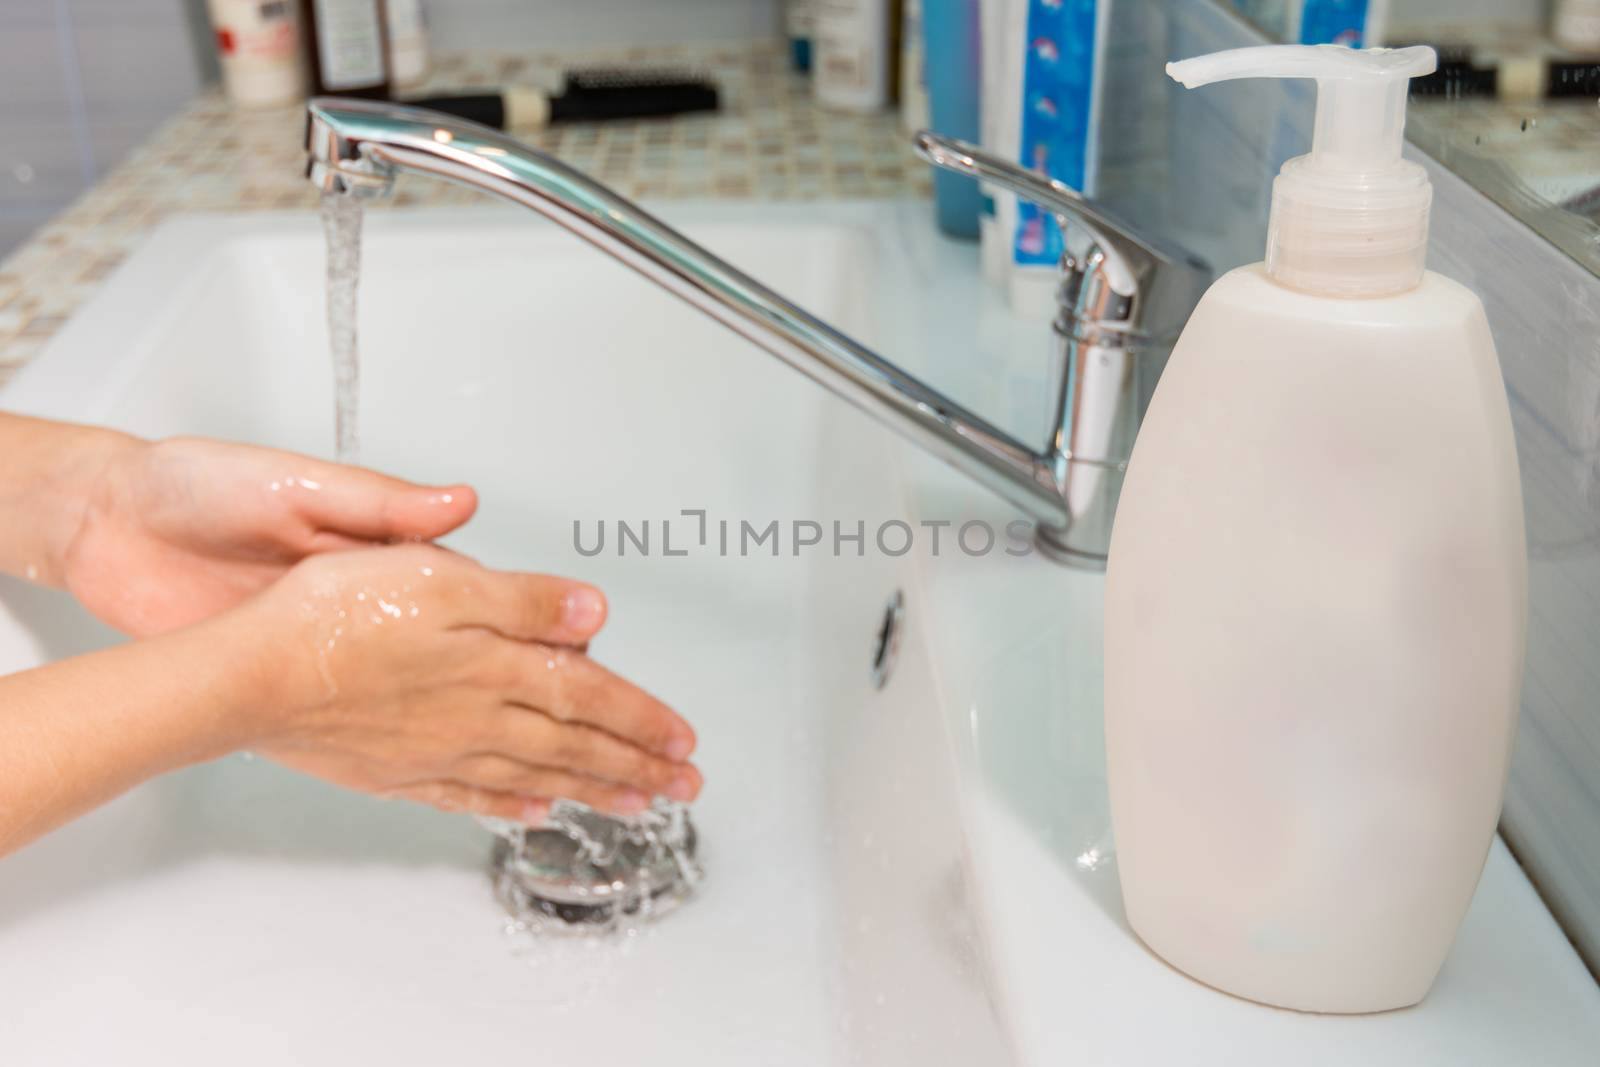 The child washes his hands under the tap, in the foreground a tube of liquid soap